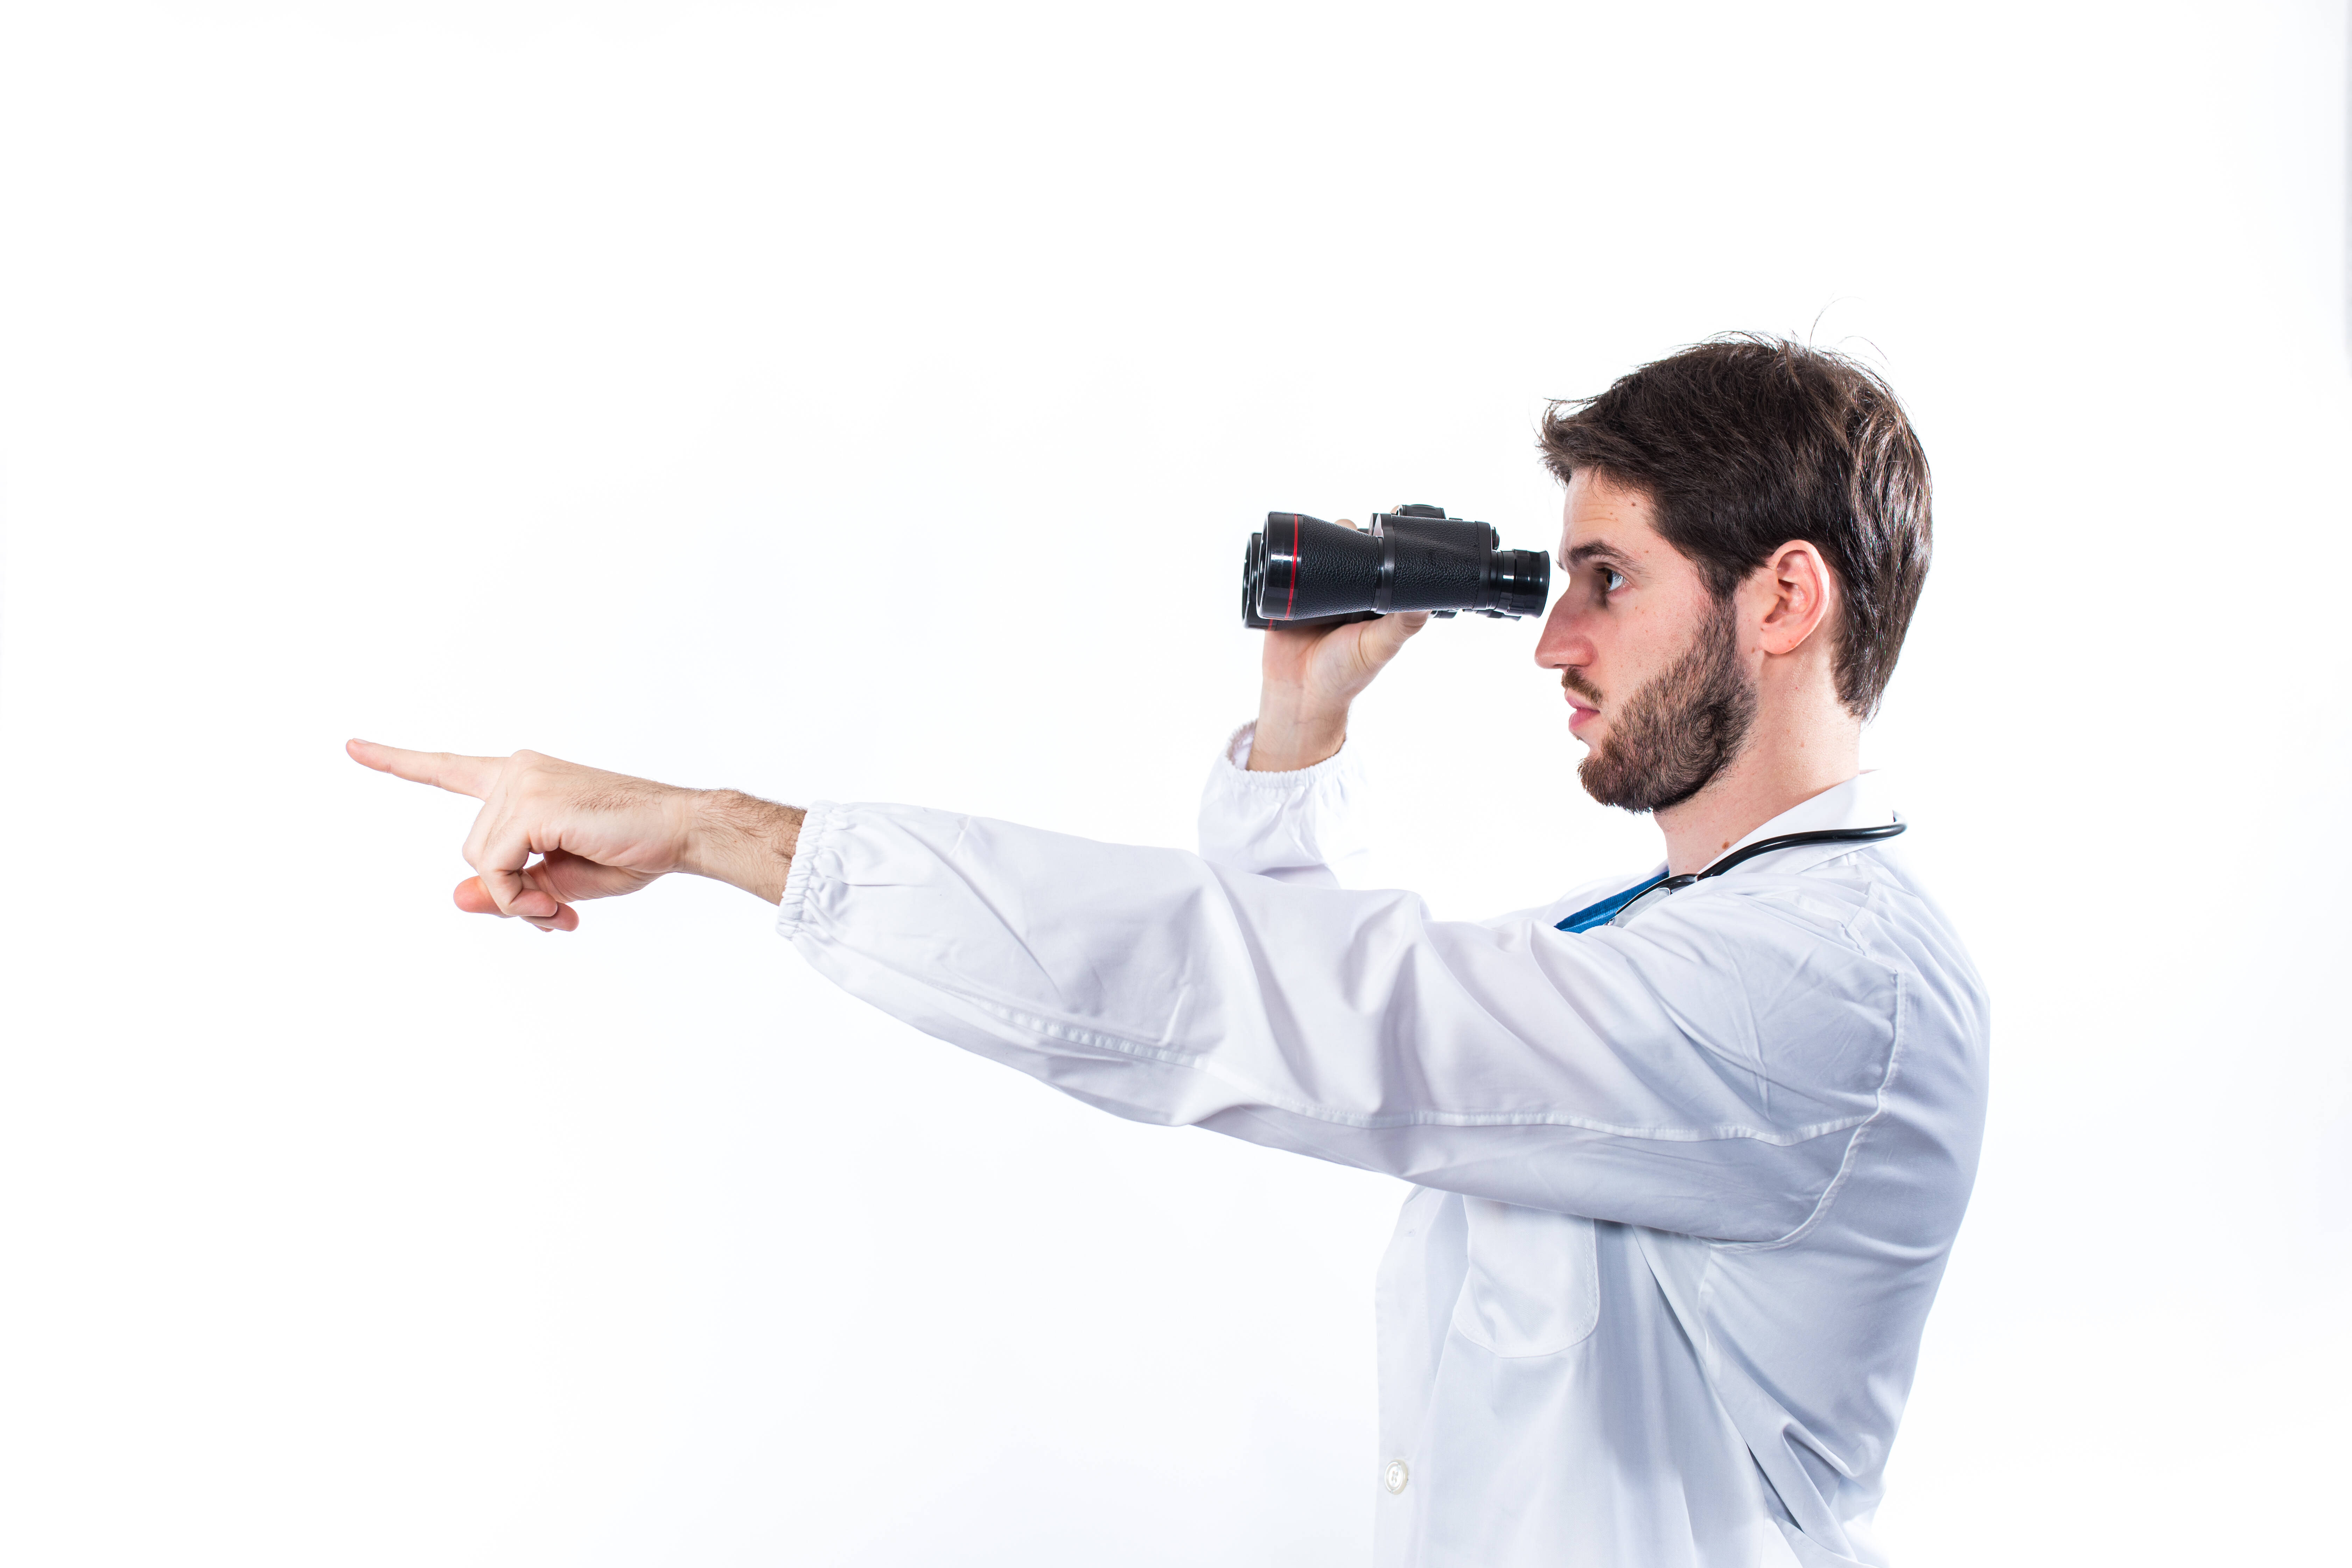 A medical doctor with binoculars will help you show your audience which way you’re looking to the future